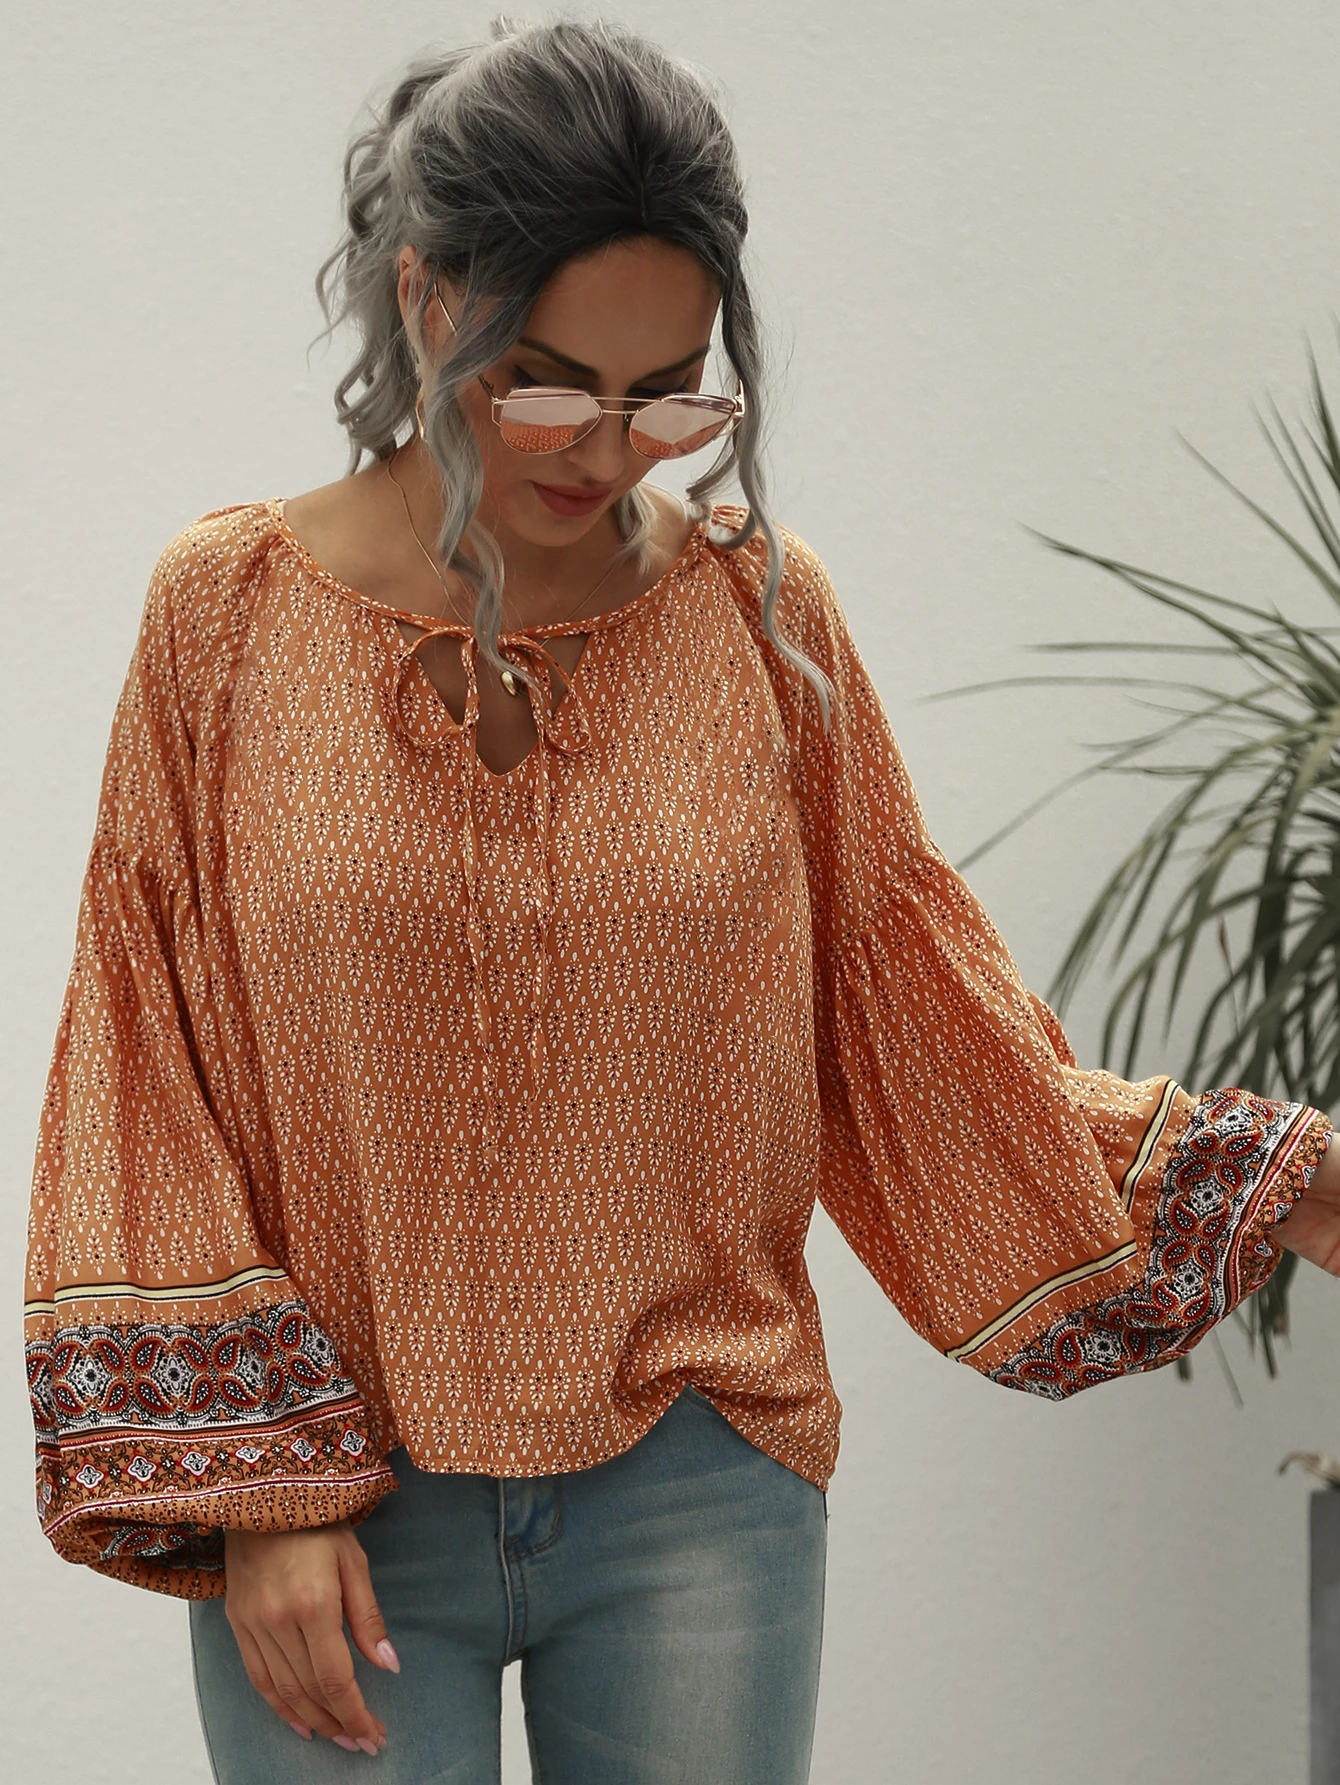 Women's Retro Blouses Tops Long Sleeve Bohemian Printed Tops Lace Up Lantern Sleeve Fall Loose Casual Shirts off the shoulder shirts & tops